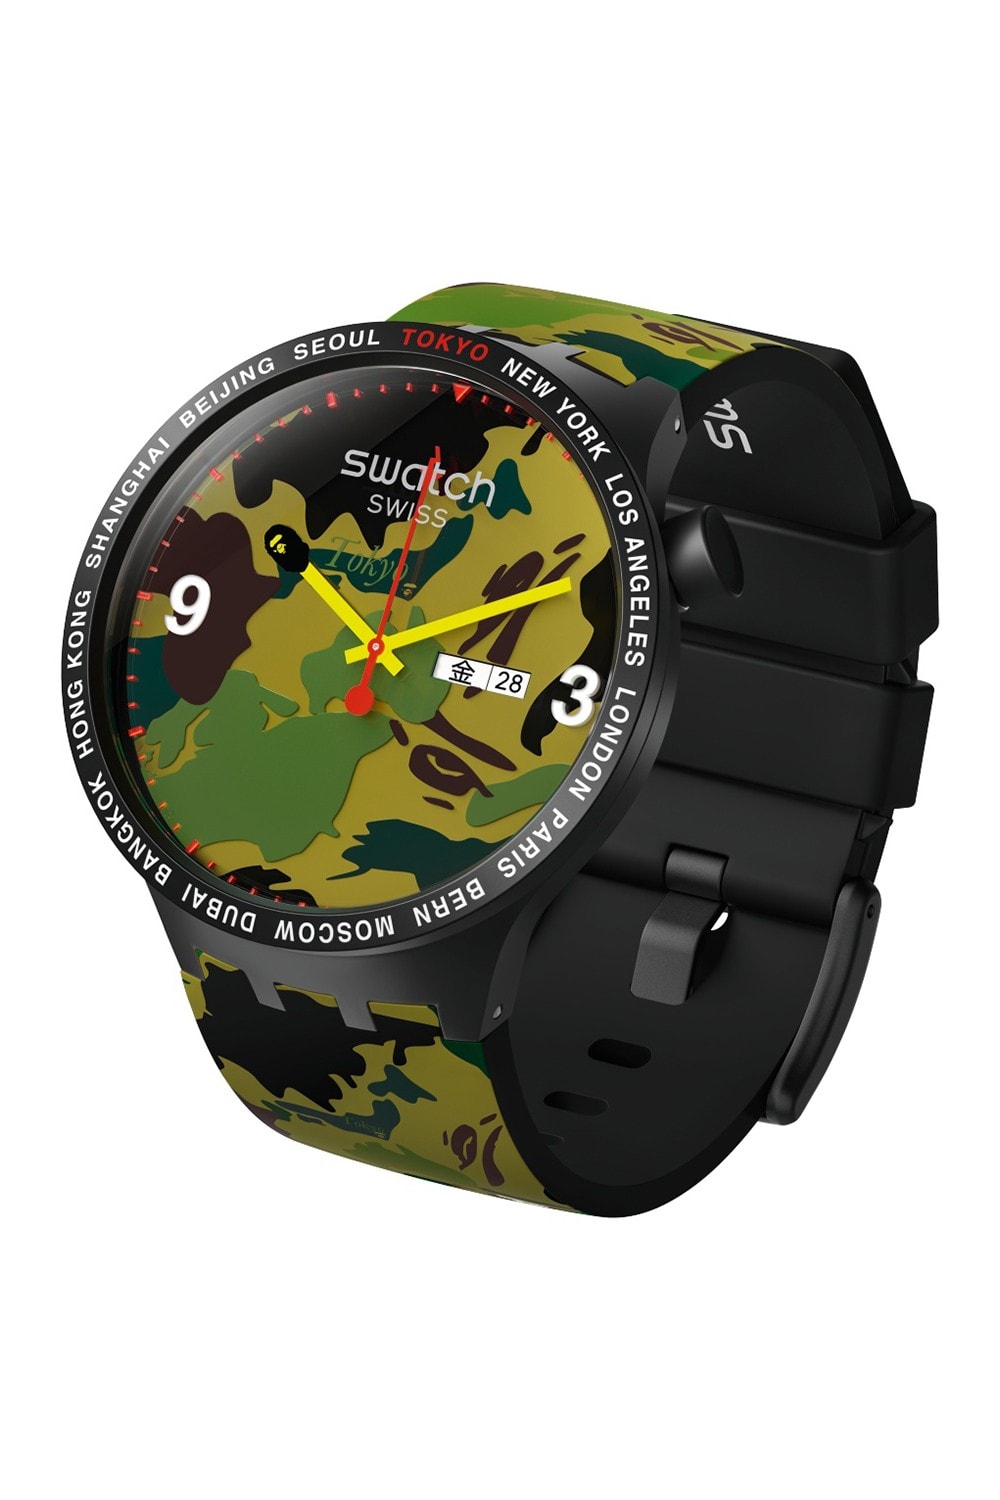 BAPE A Bathing Ape x Swatch Watch Collaboration Camouflage Green Black